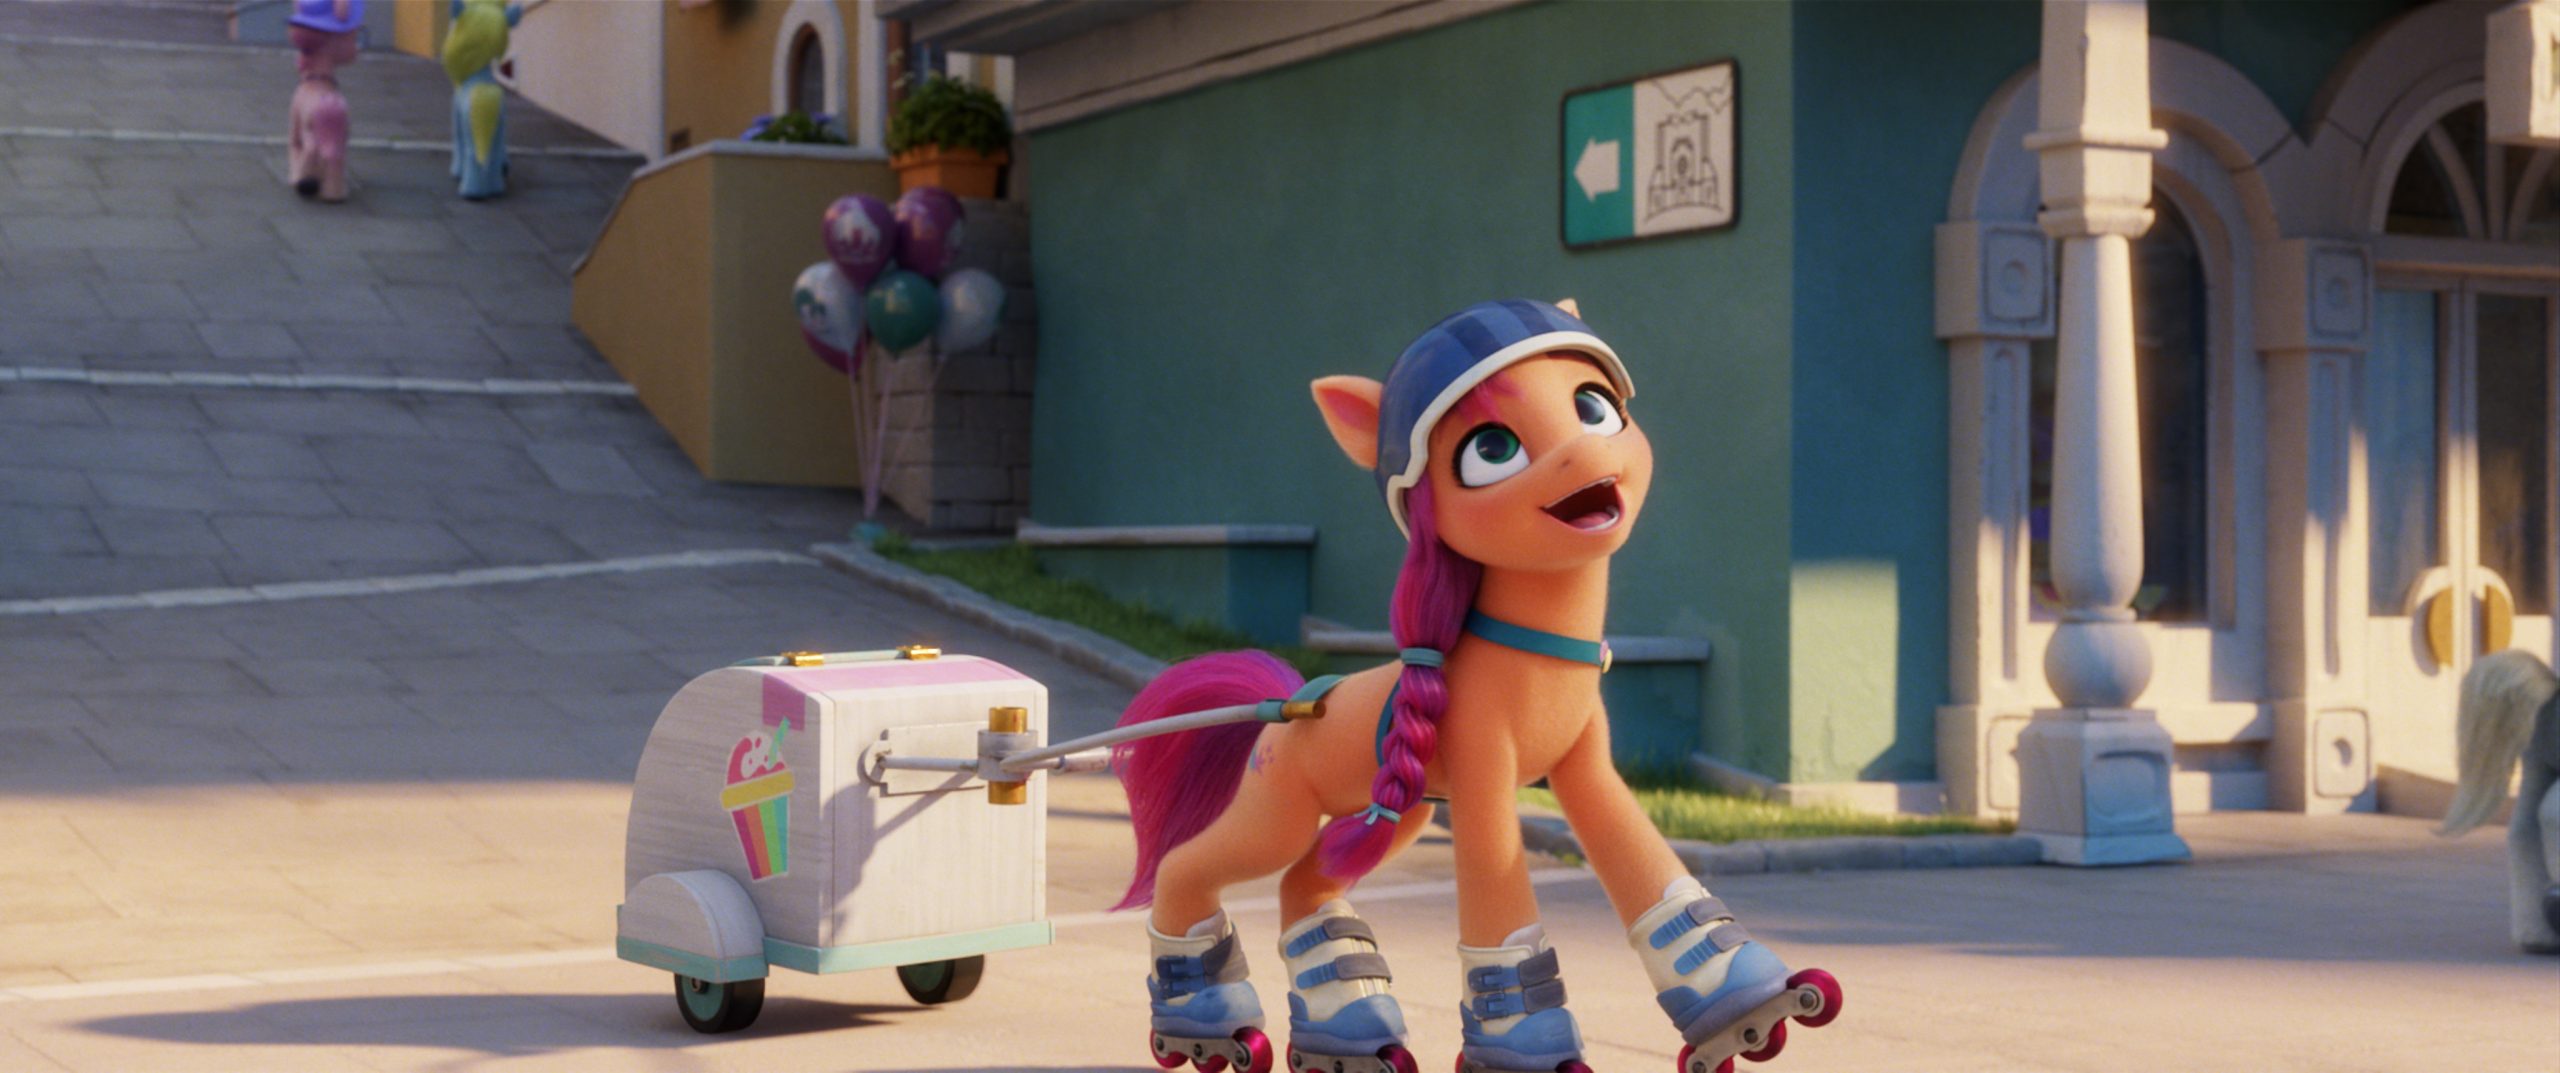 Exclusive: Check Out the Trailer for The New 'My Little Pony